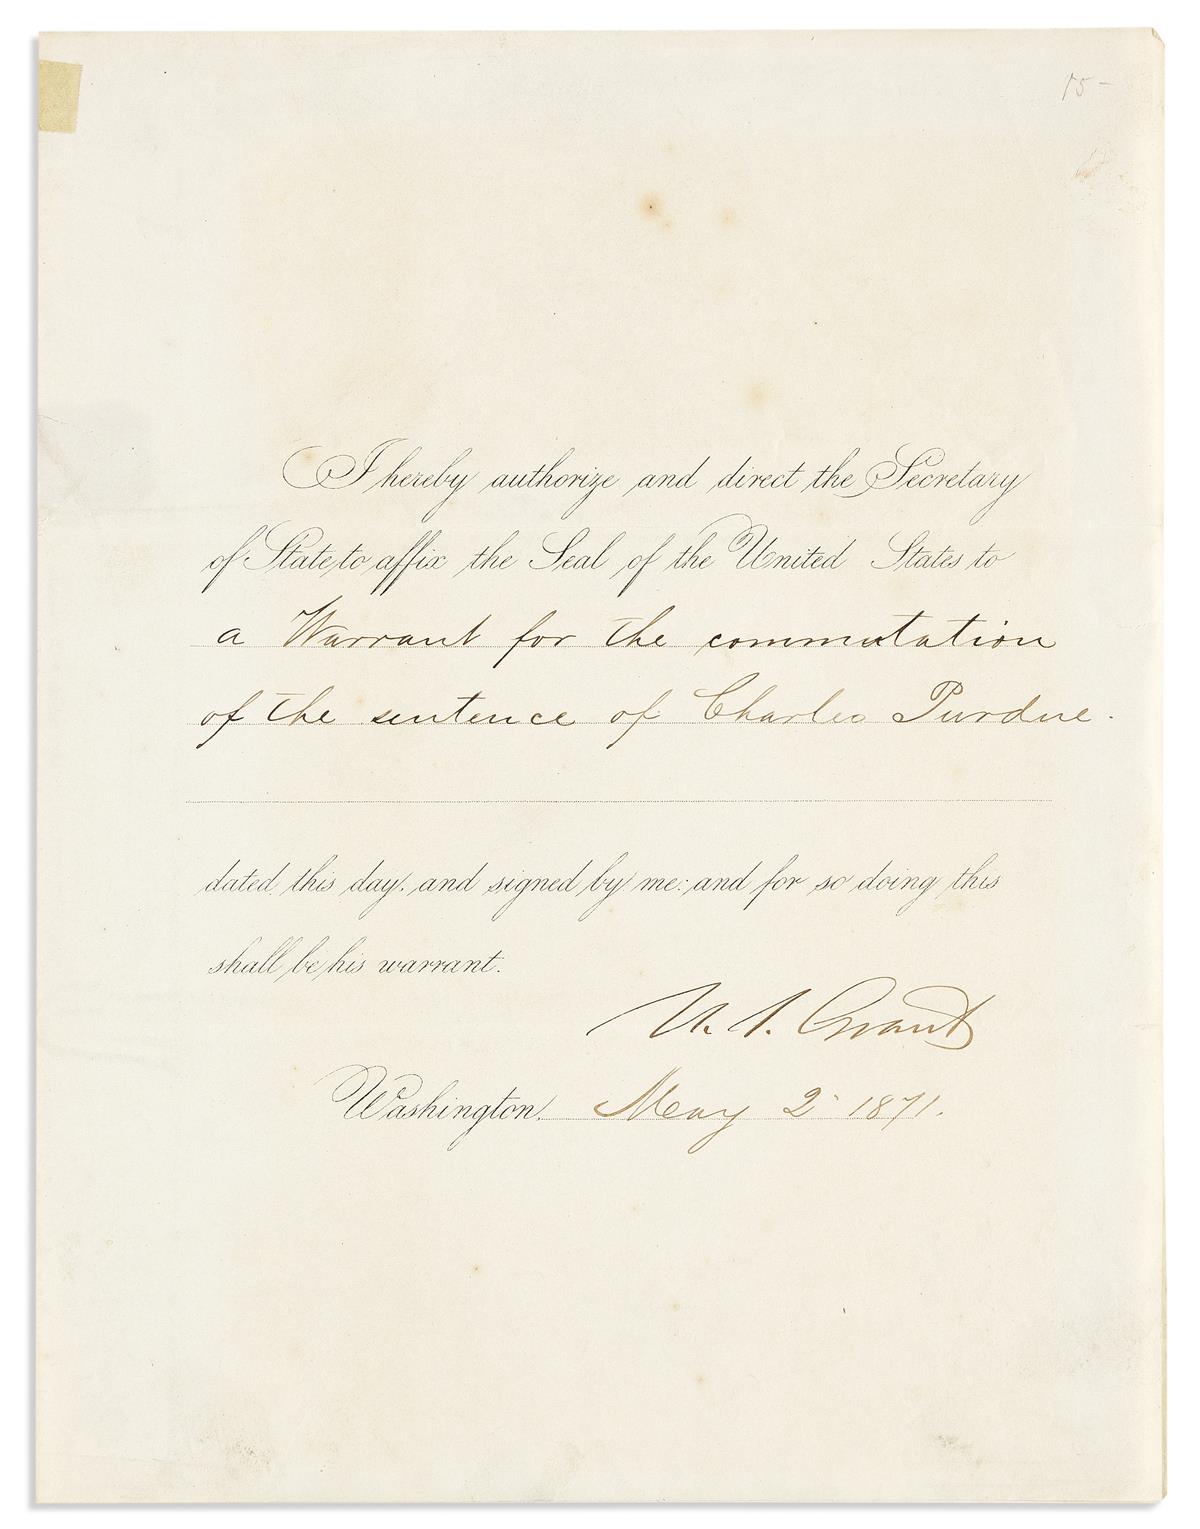 GRANT, ULYSSES S. Partly-printed Document Signed, U.S. Grant, as President,